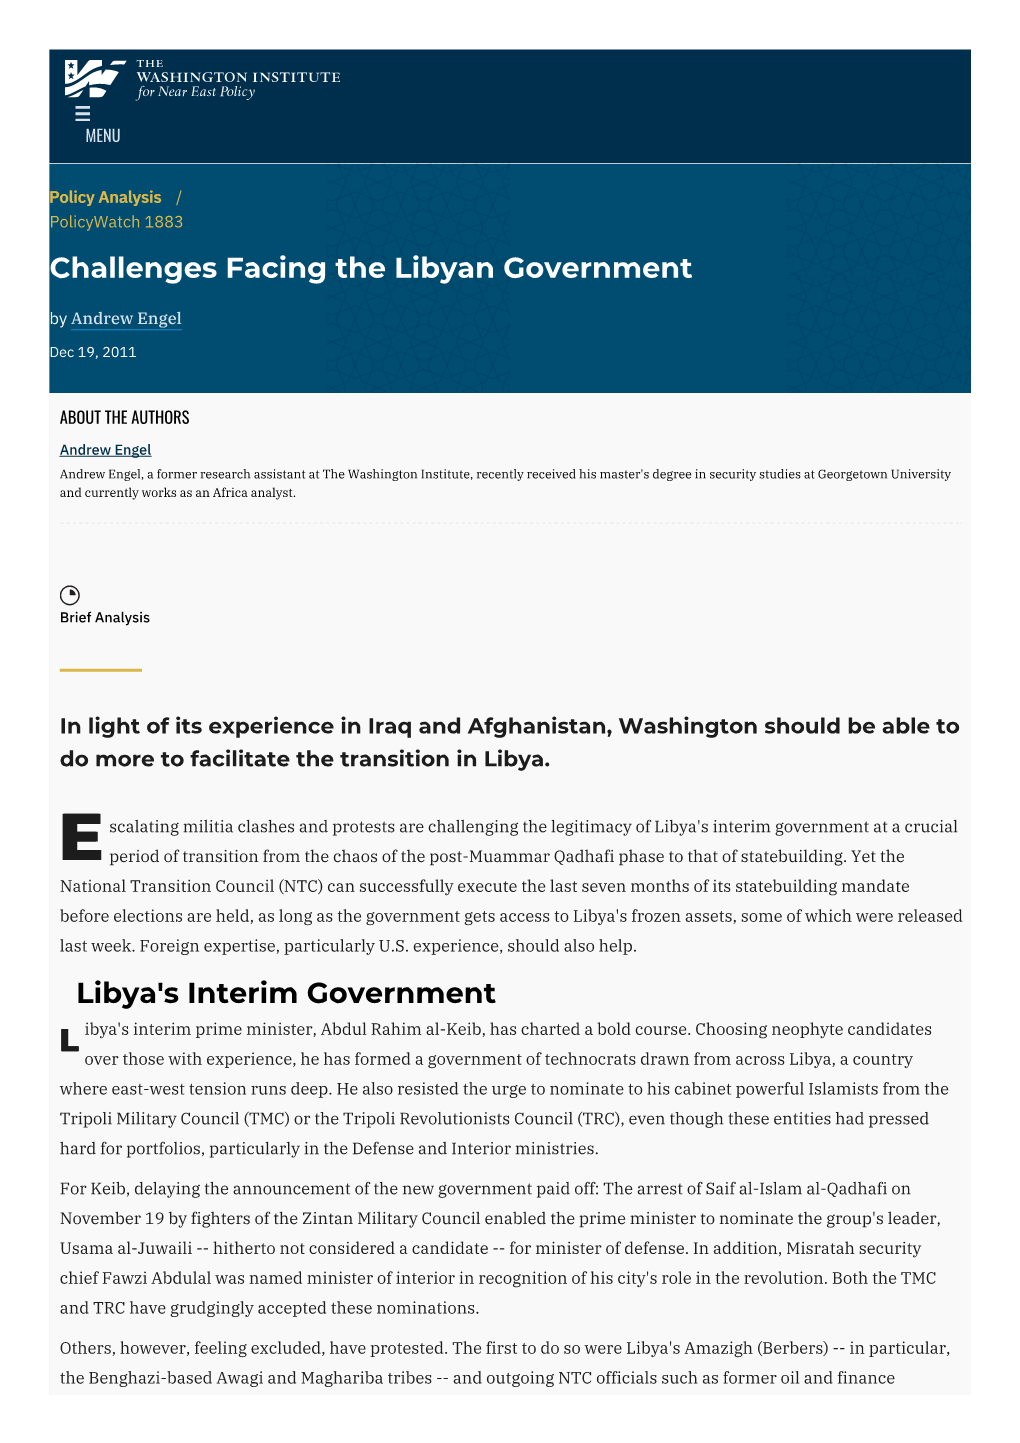 Challenges Facing the Libyan Government | the Washington